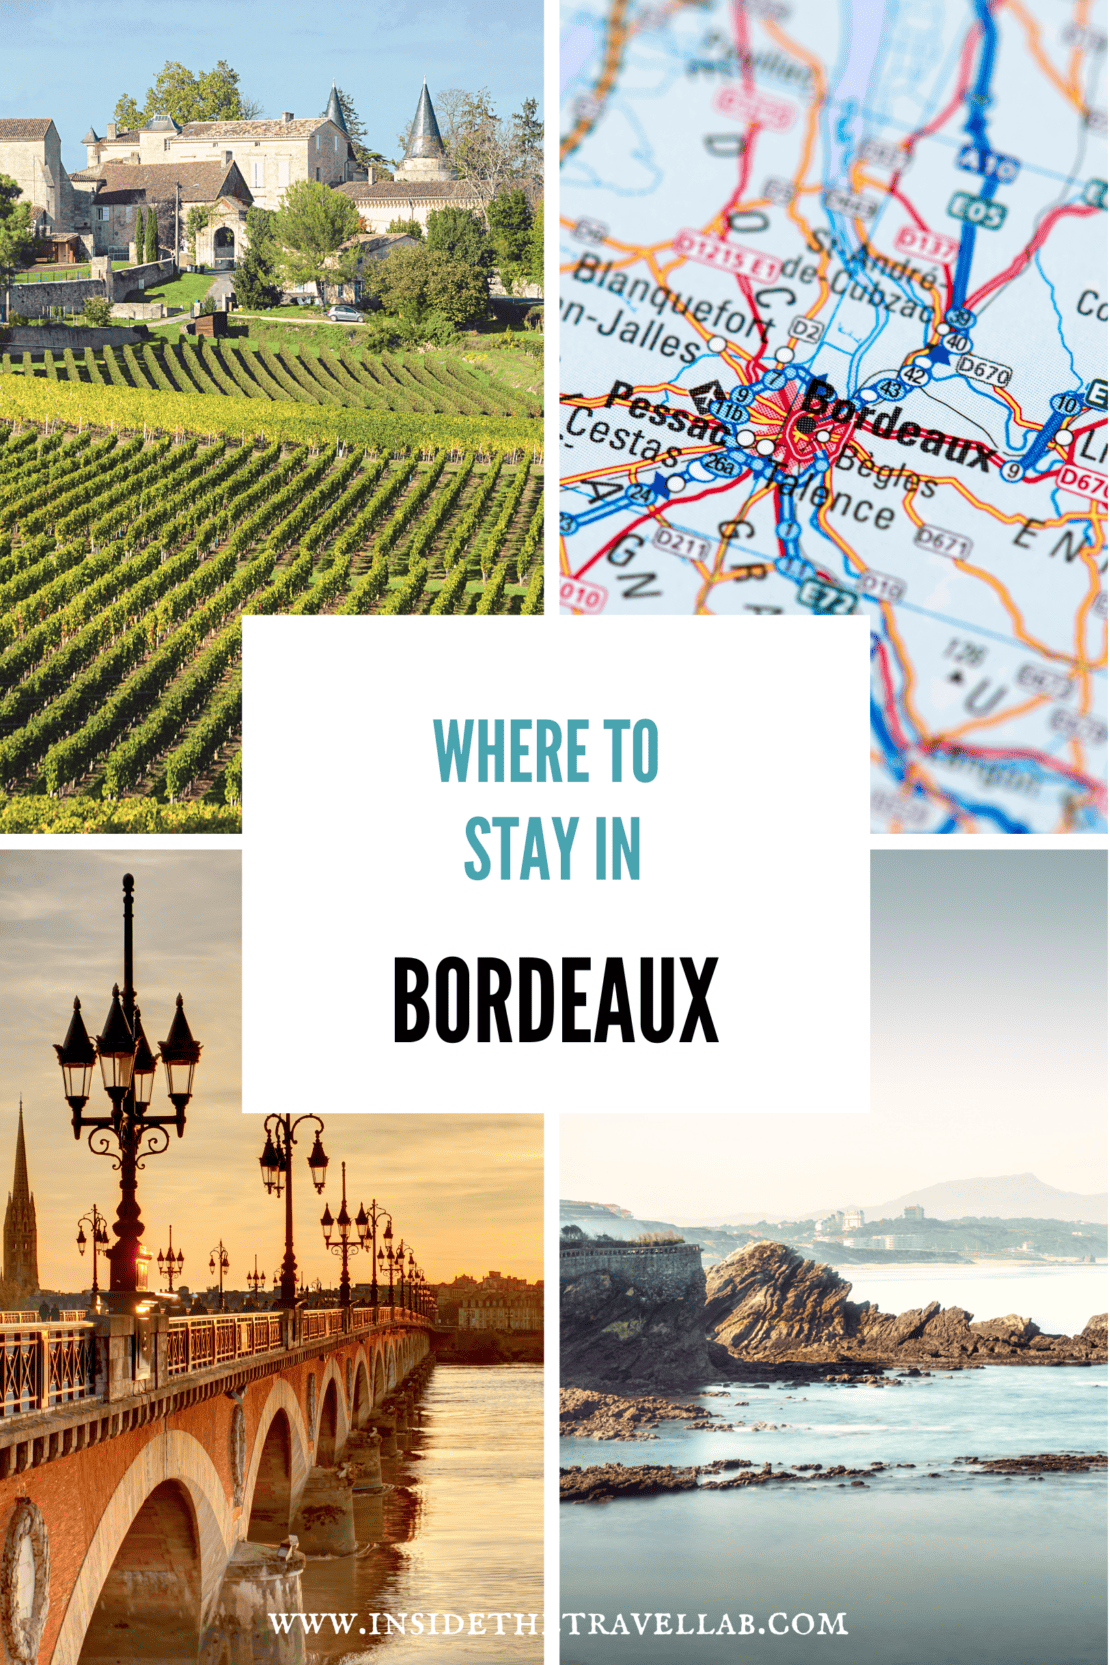 Collage of images that represent where to stay in Bordeaux including a map, vineyard, coastal and city spot